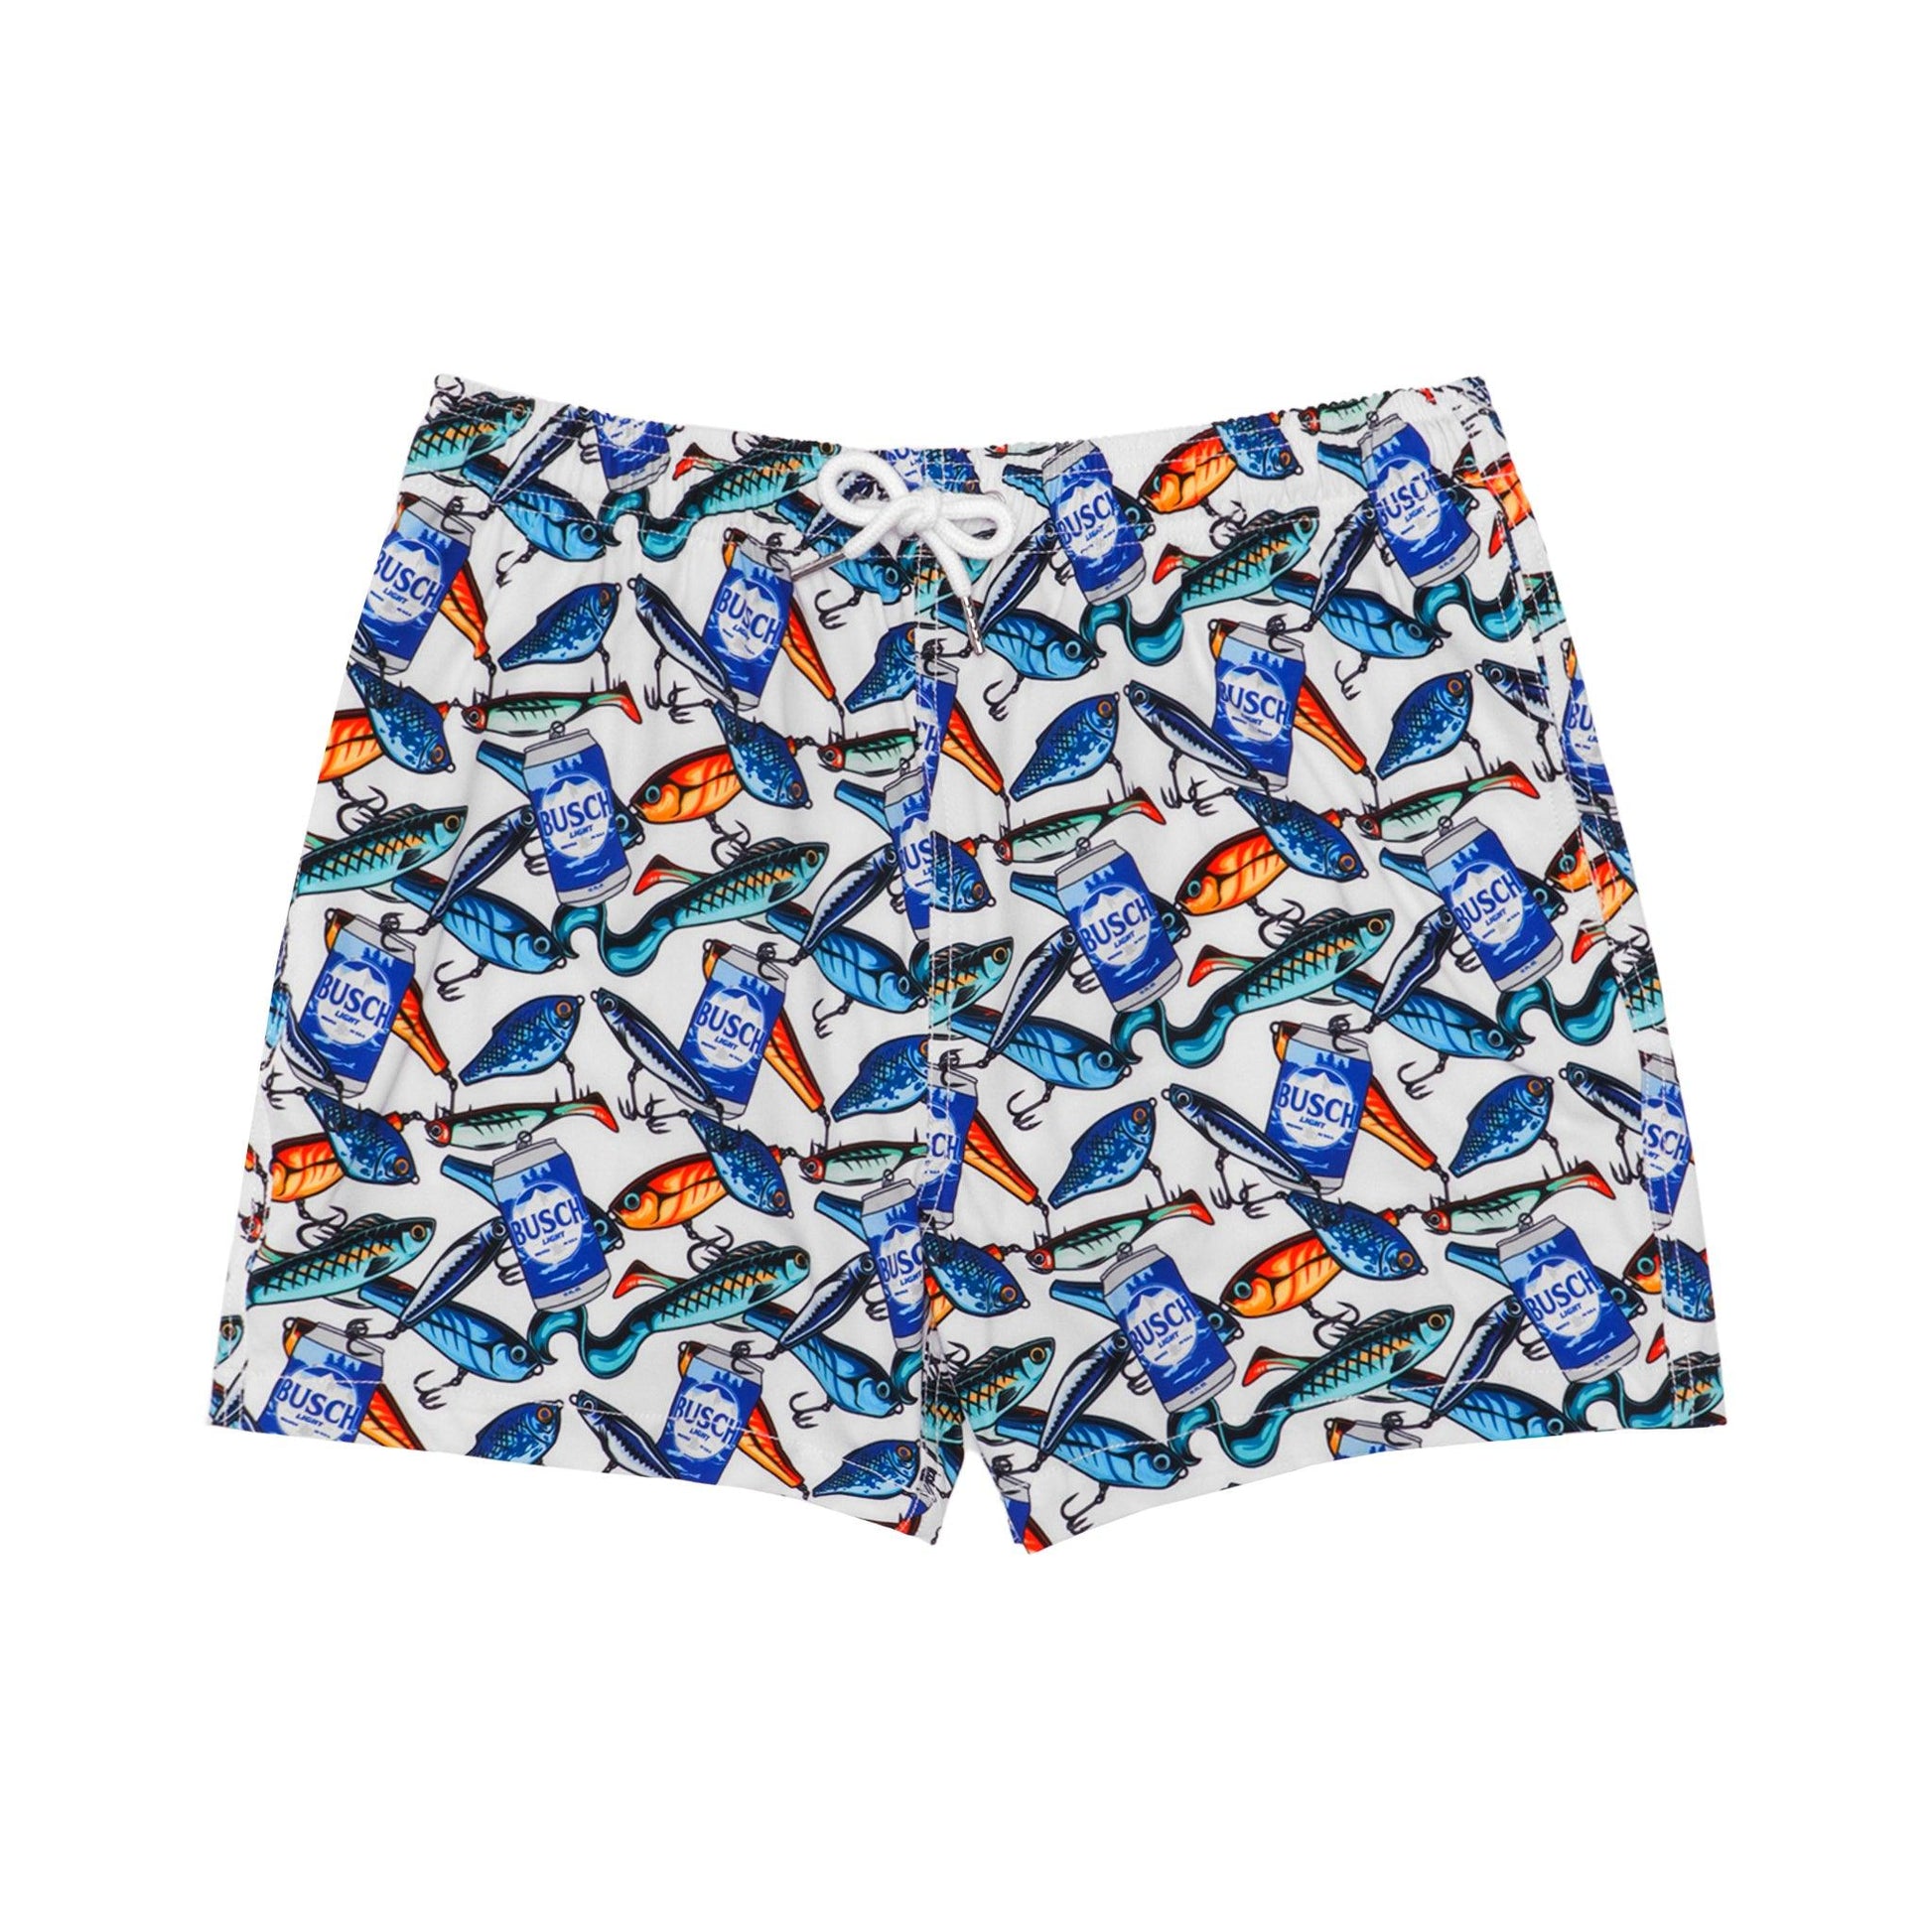 front of Busch Light Fishing Lure Swim Trunks with Busch Light cans and fishing lures scattered all over the trunks.